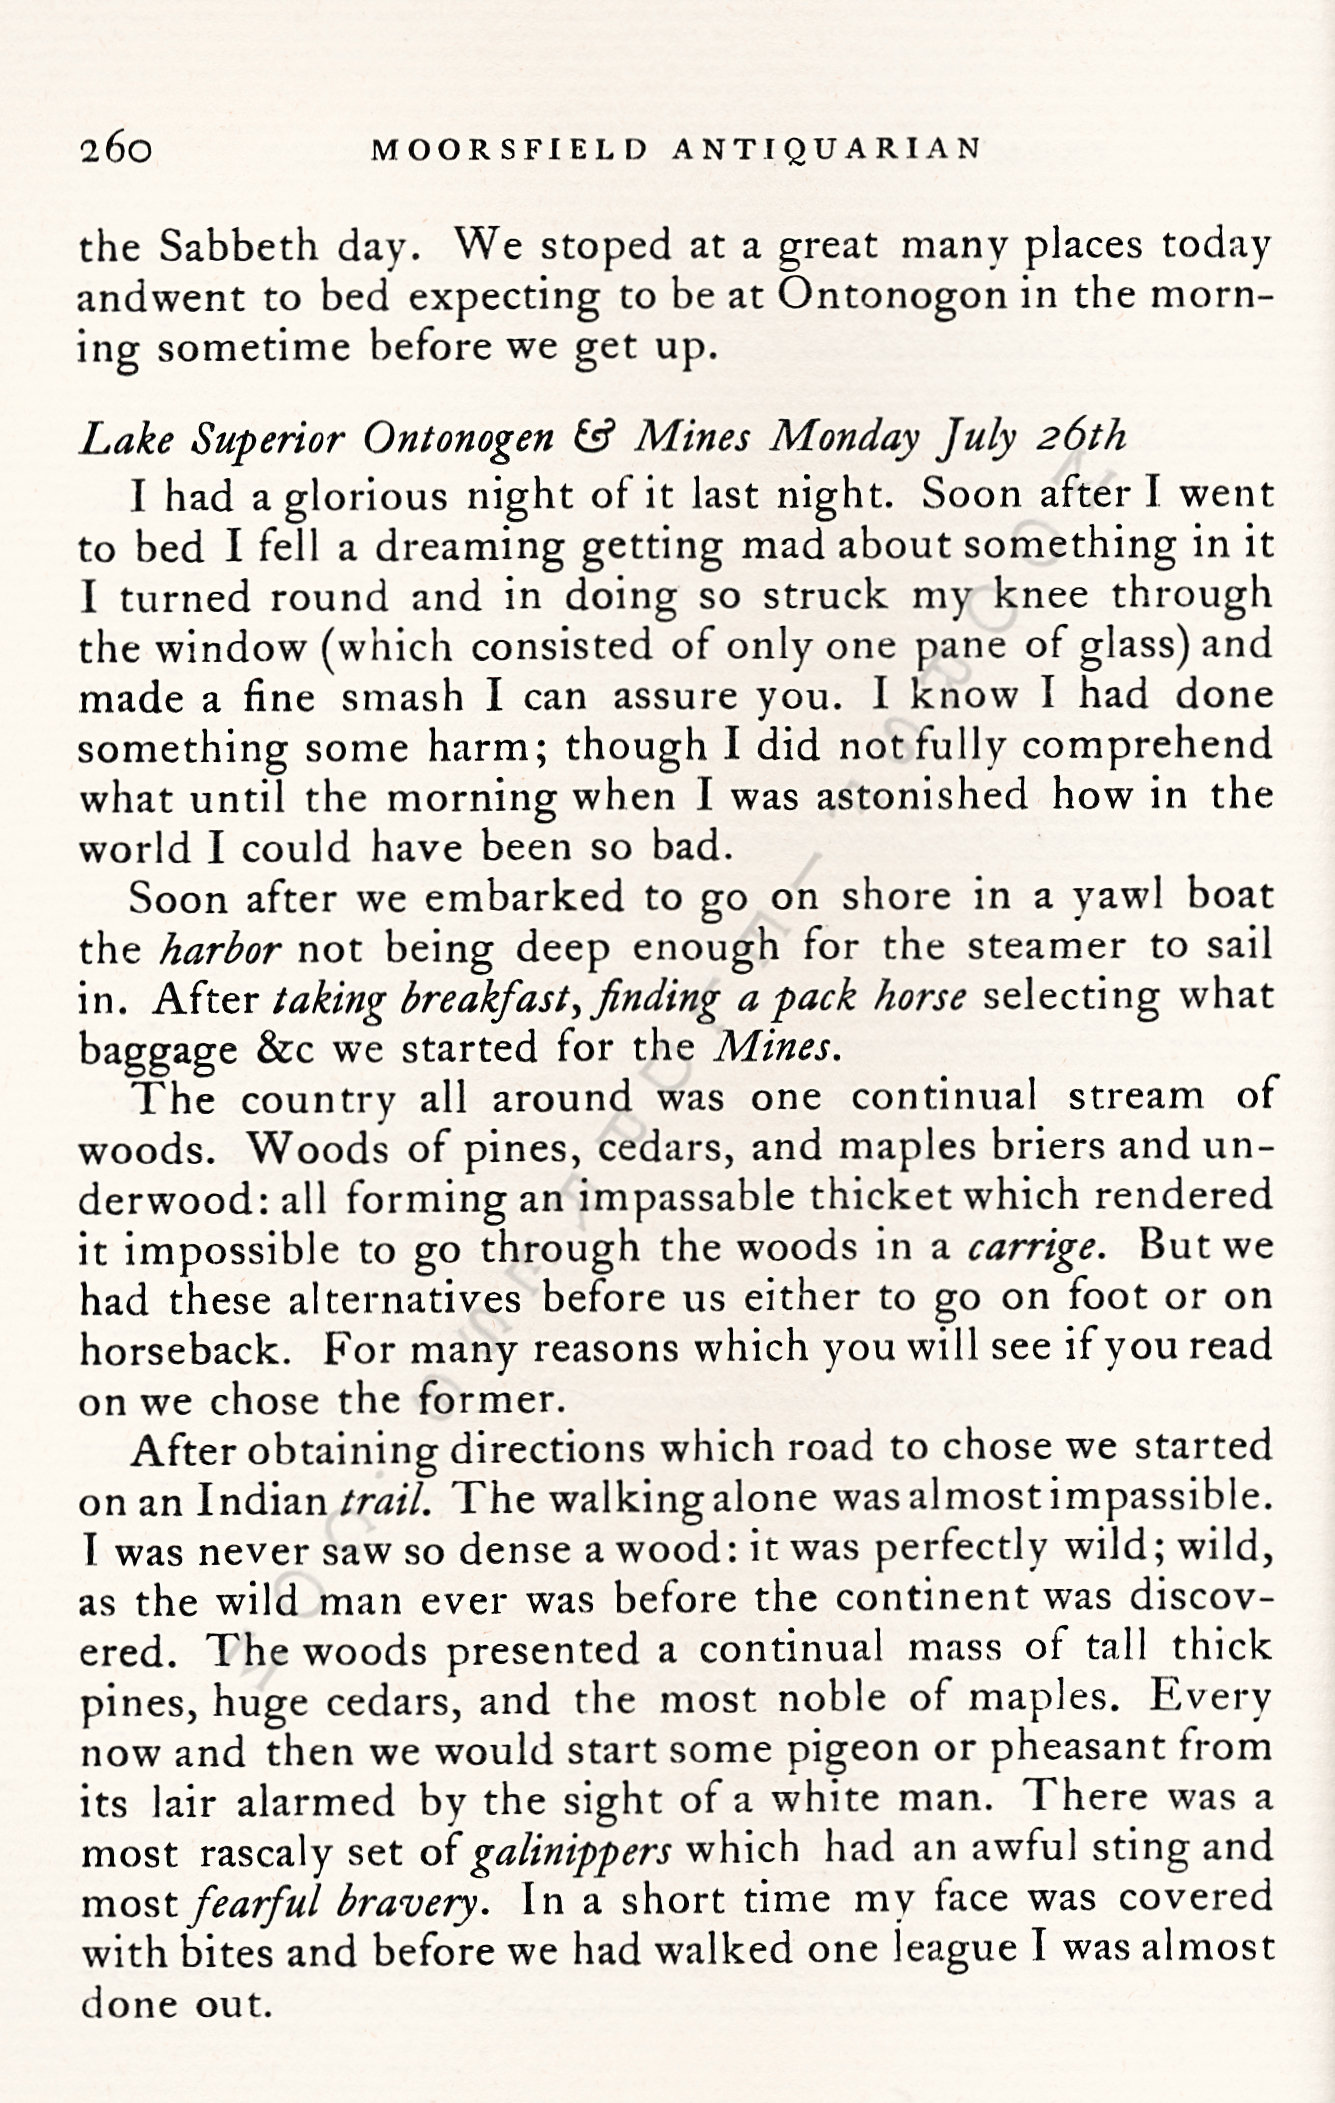 From
                      Allegheny To Lake Superior - Journal of George M.
                      McGill -Summer of 1852